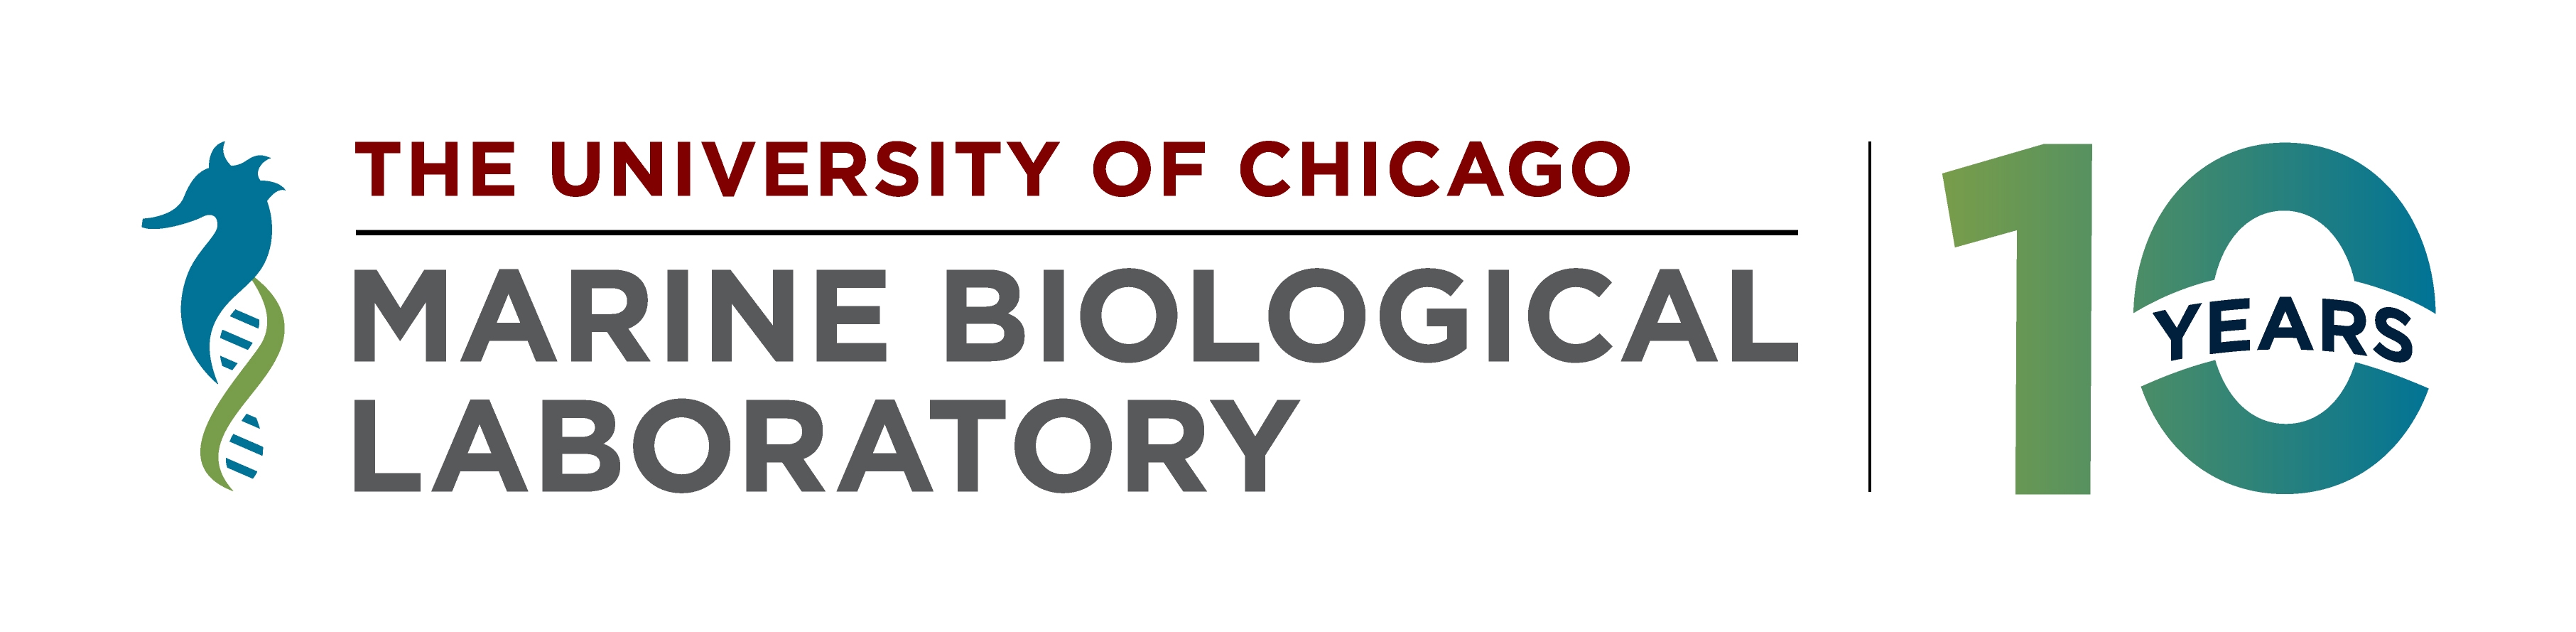 10th anniversary of the MBL UCHicago affiliation logo